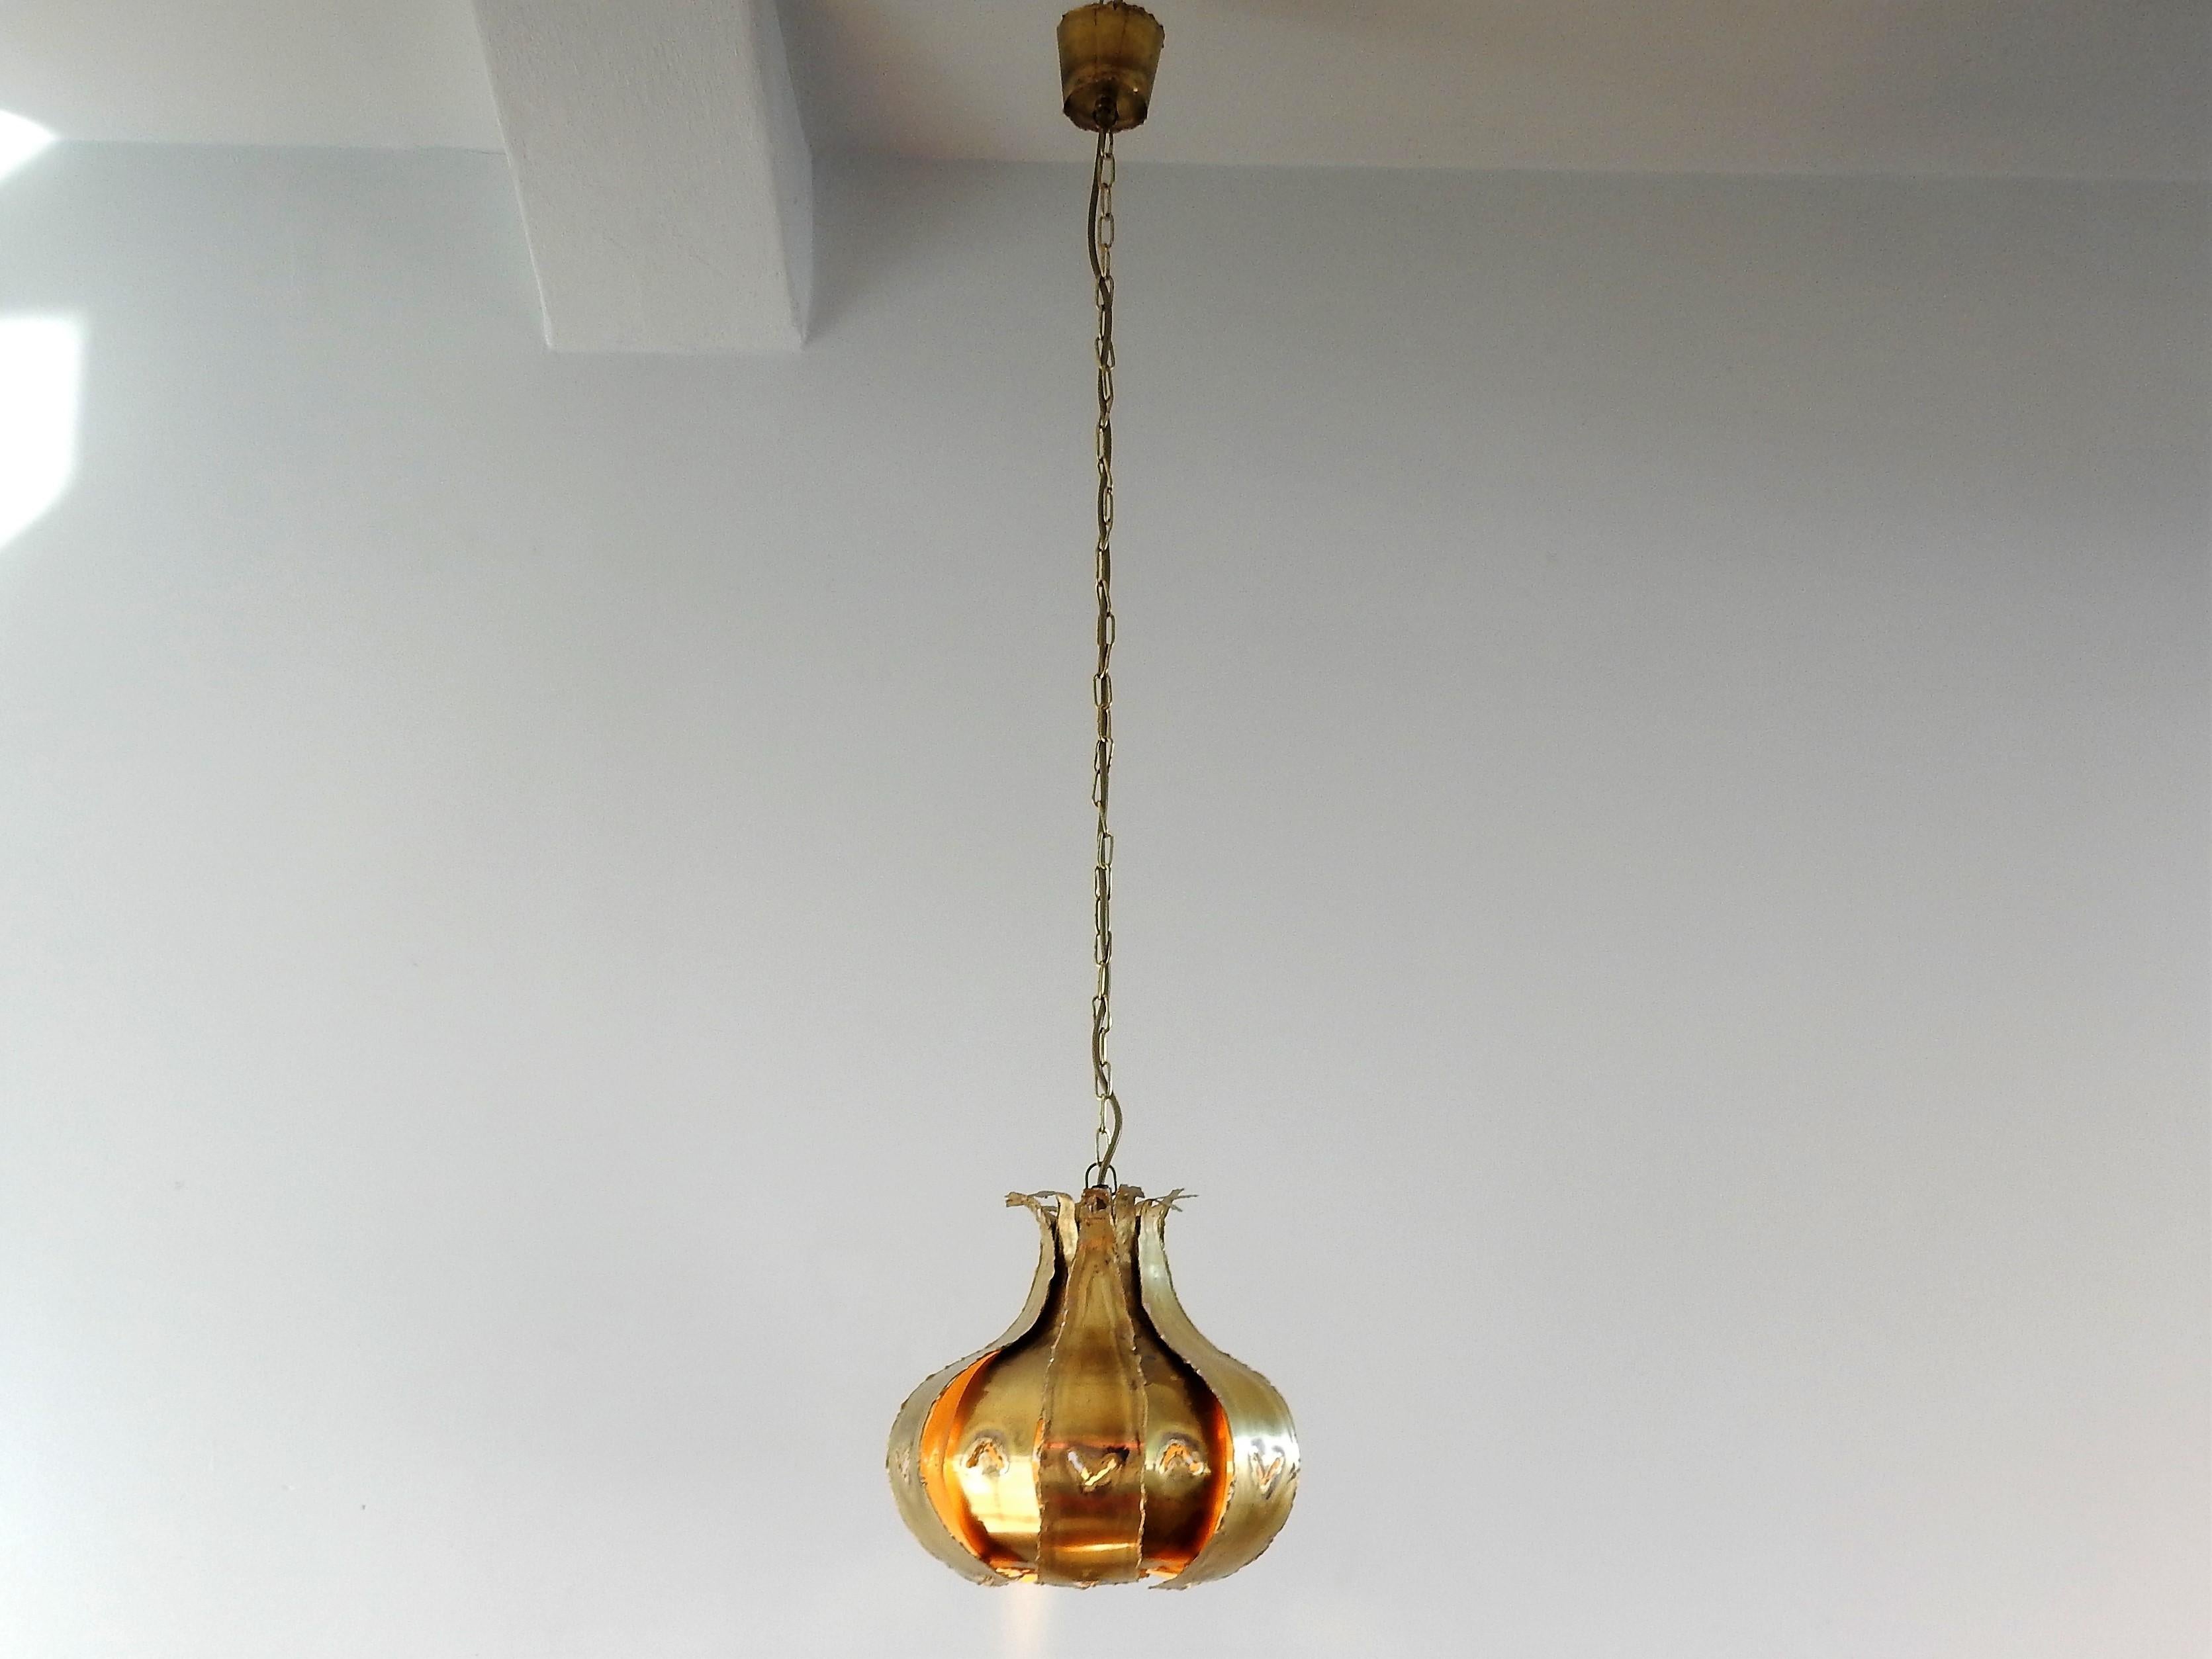 This Brutalist pendant lamp is a production by Thea Metal from Denmark. The design is by Svend Aage Holm Sorensen or inspired on designs by him. The 'onion' shaped lamp consists out of burned brass 'leaves' that was a charcteristic proces of Svend